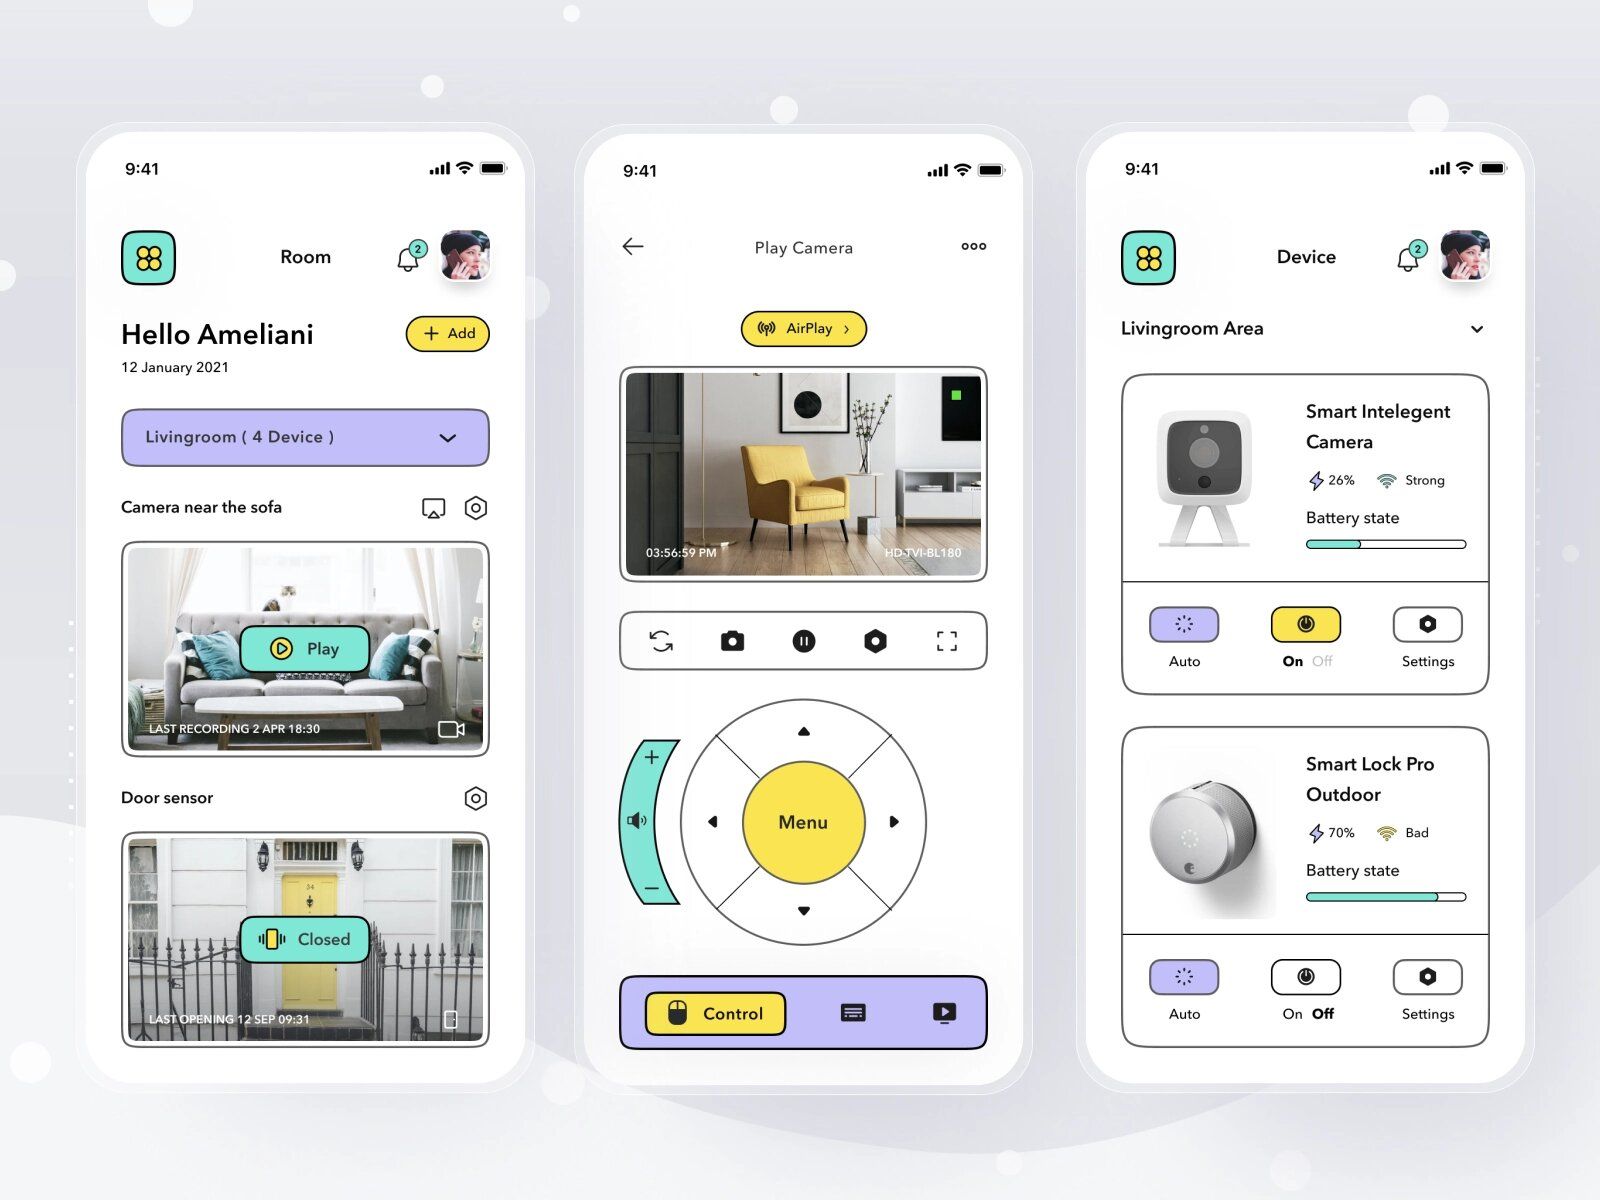 To develop a smart home automation system, you can build an IoT mobile application  (home automation apps specifically) and enable convenient smart devices control (*image by [Sulton handaya](https://dribbble.com/sultonhand){ rel="nofollow" target="_blank" .default-md}*)